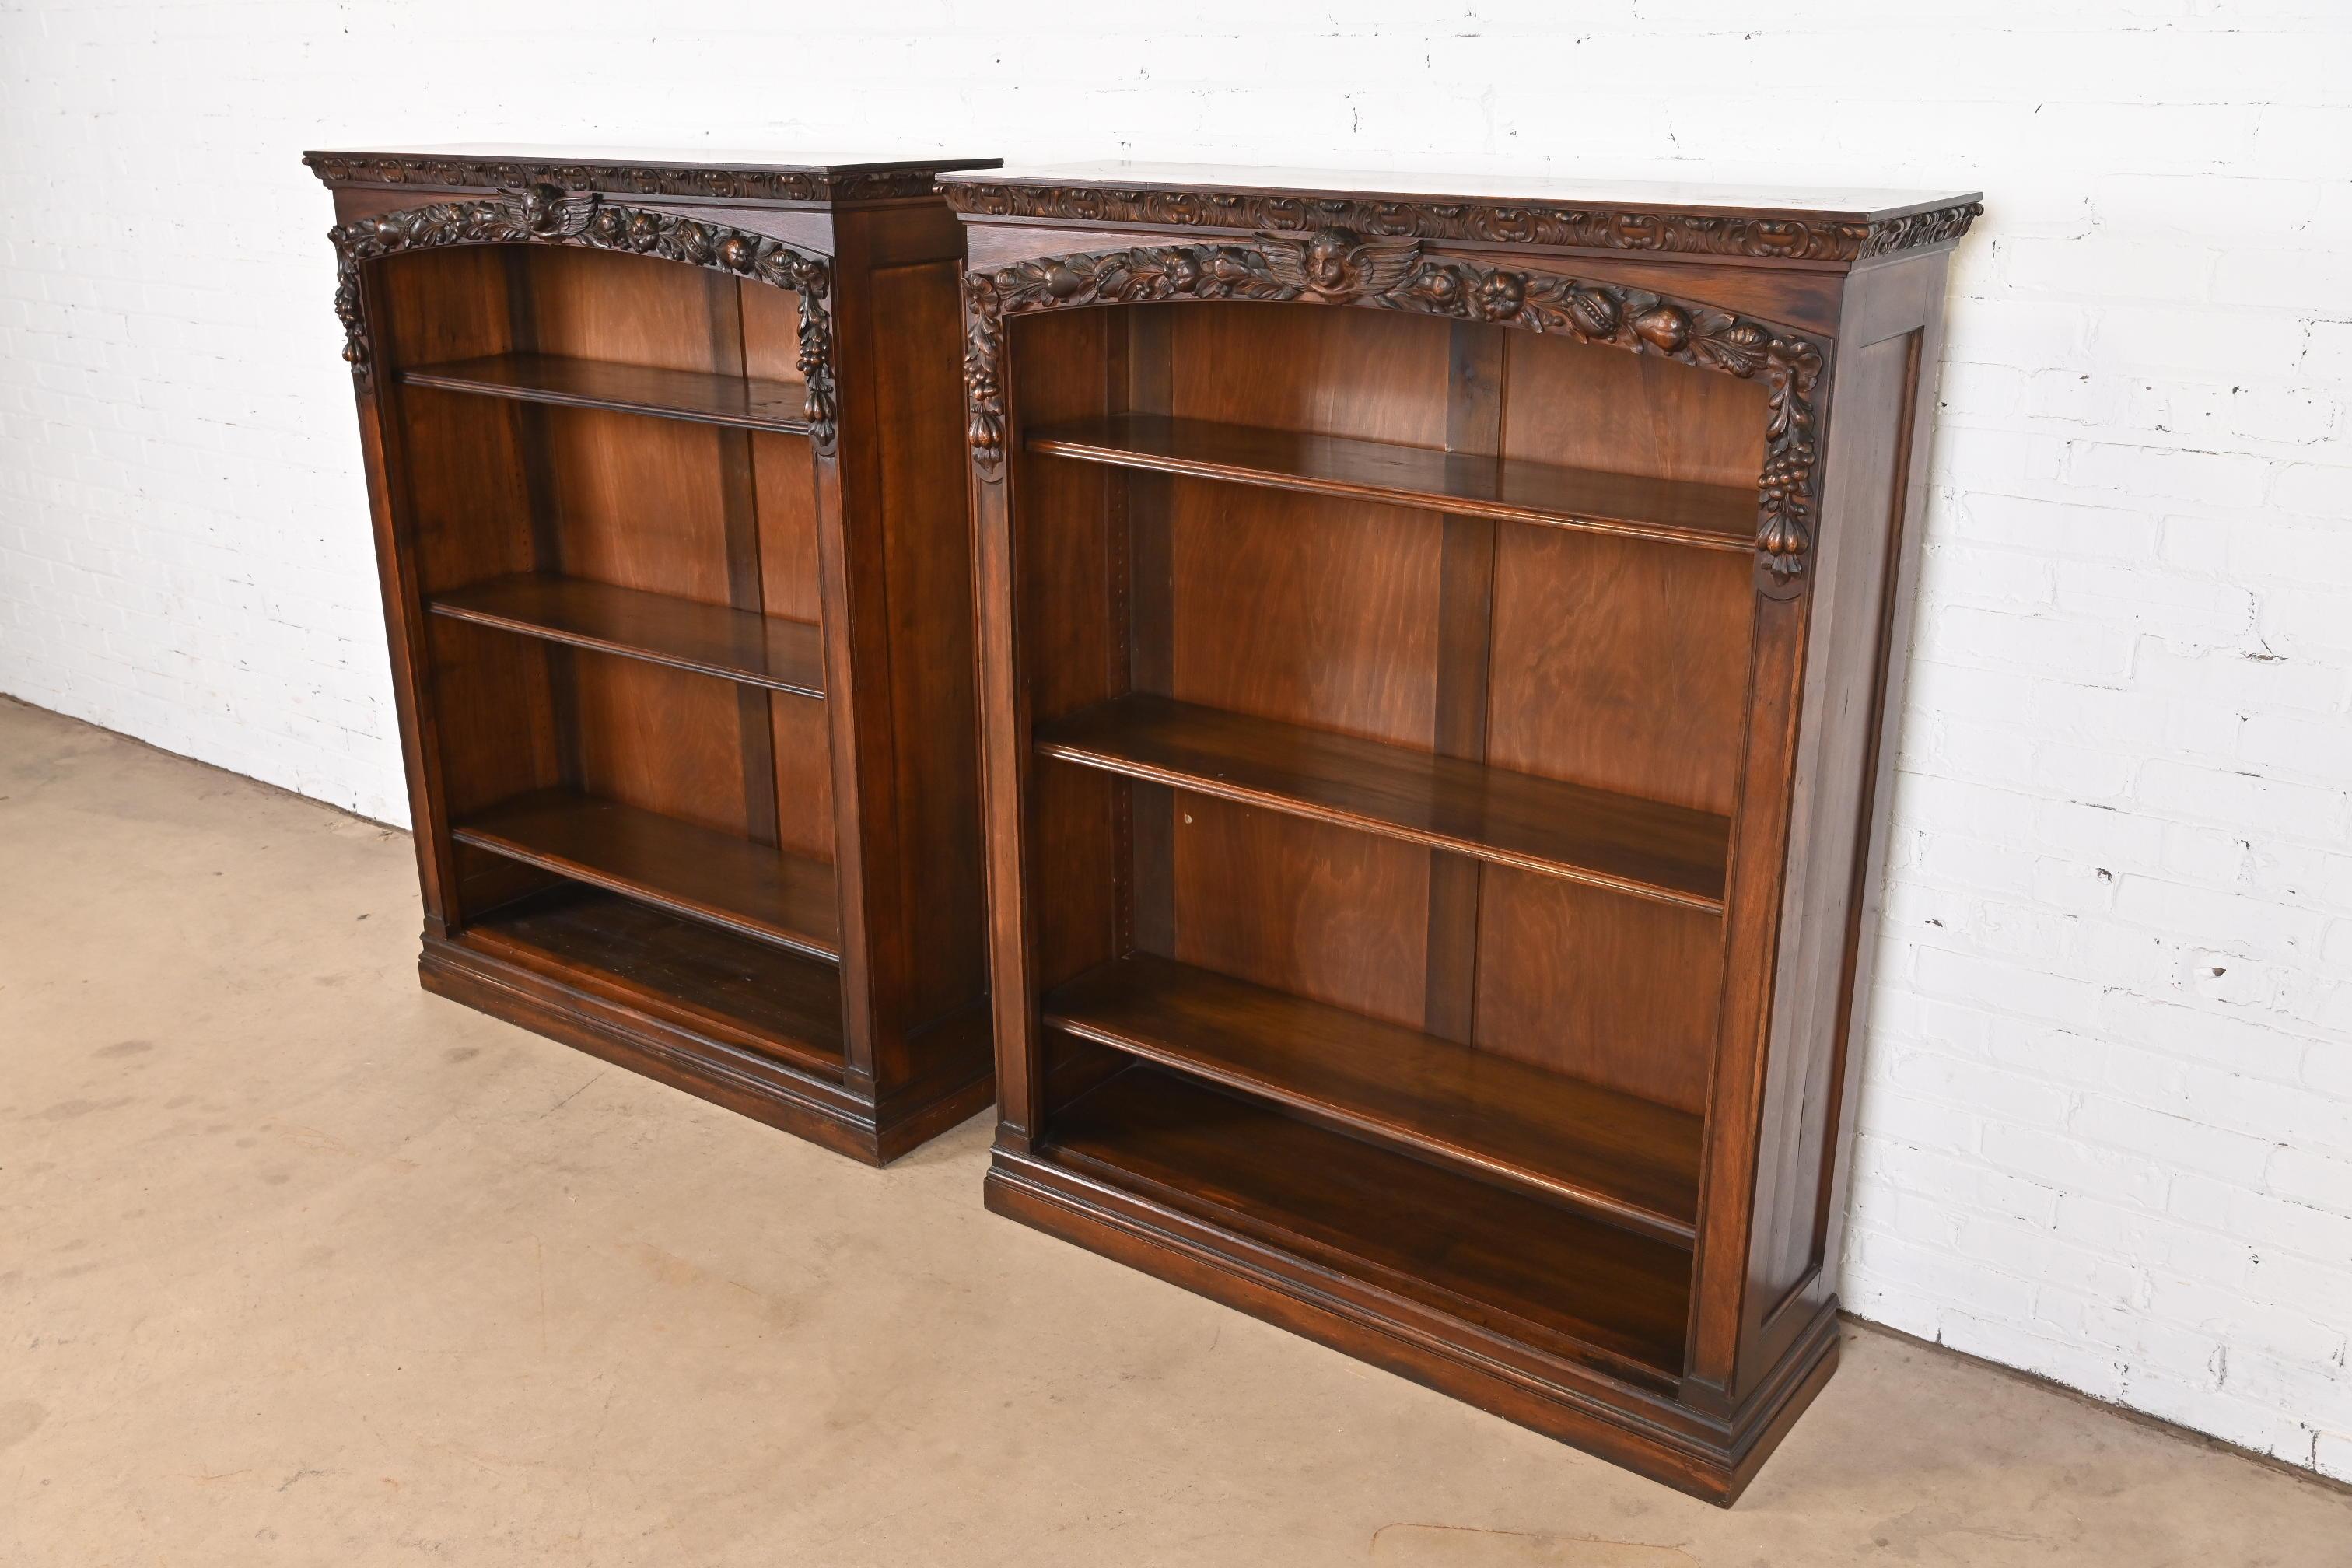 R.J. Horner Style Antique Victorian Renaissance Revival Carved Walnut Bookcases In Good Condition For Sale In South Bend, IN